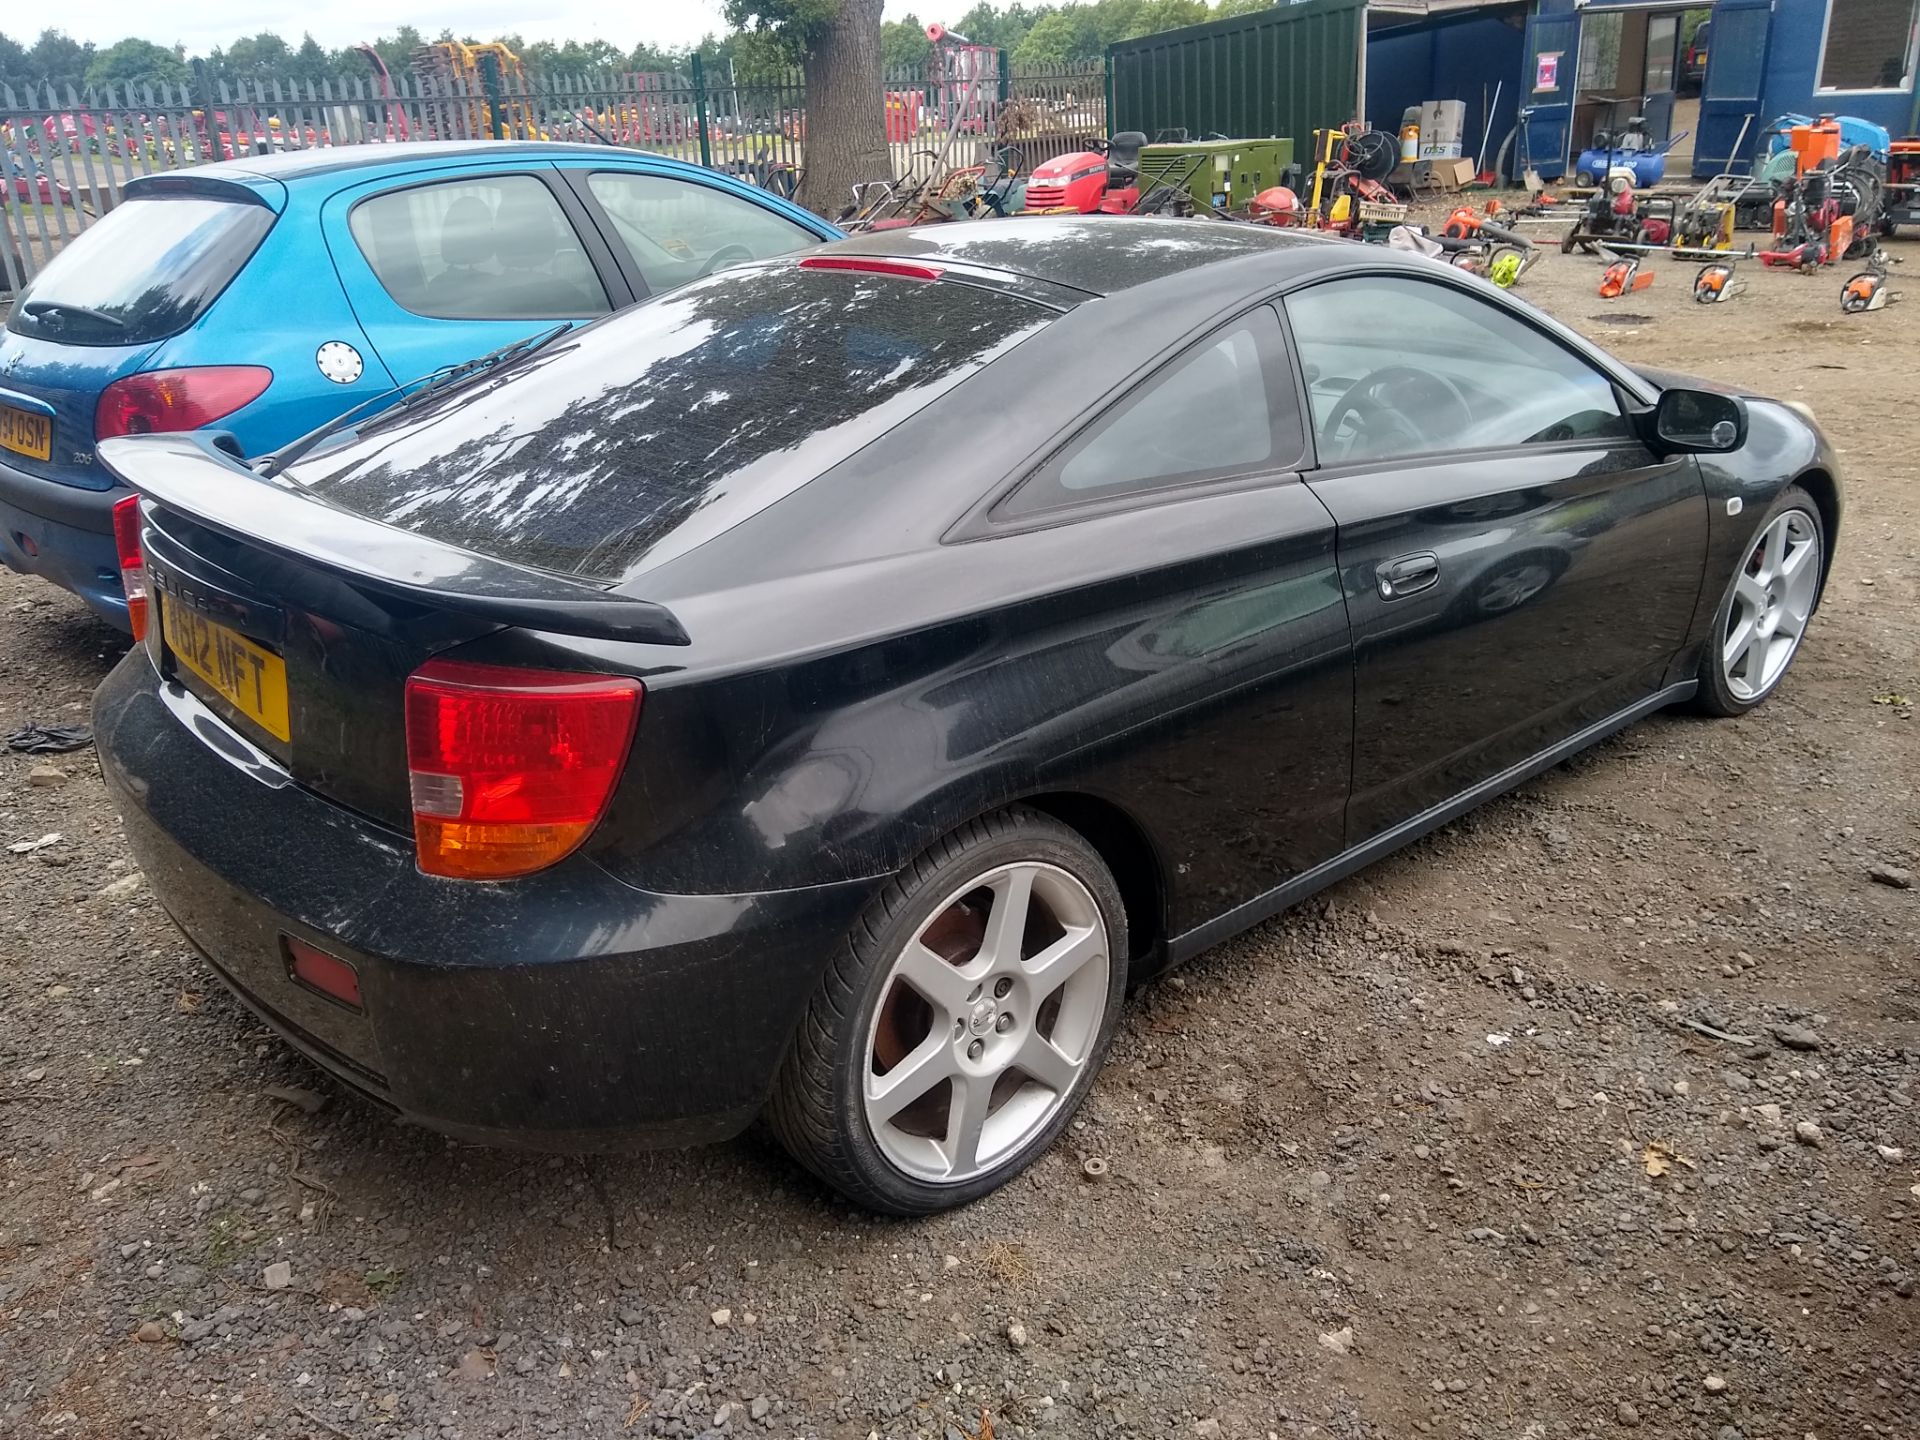 Toyota Celica VVTi coupe, 1794cc, unused for 3 years, runs and drives, no rear silencer, W612 NFT - Image 6 of 9